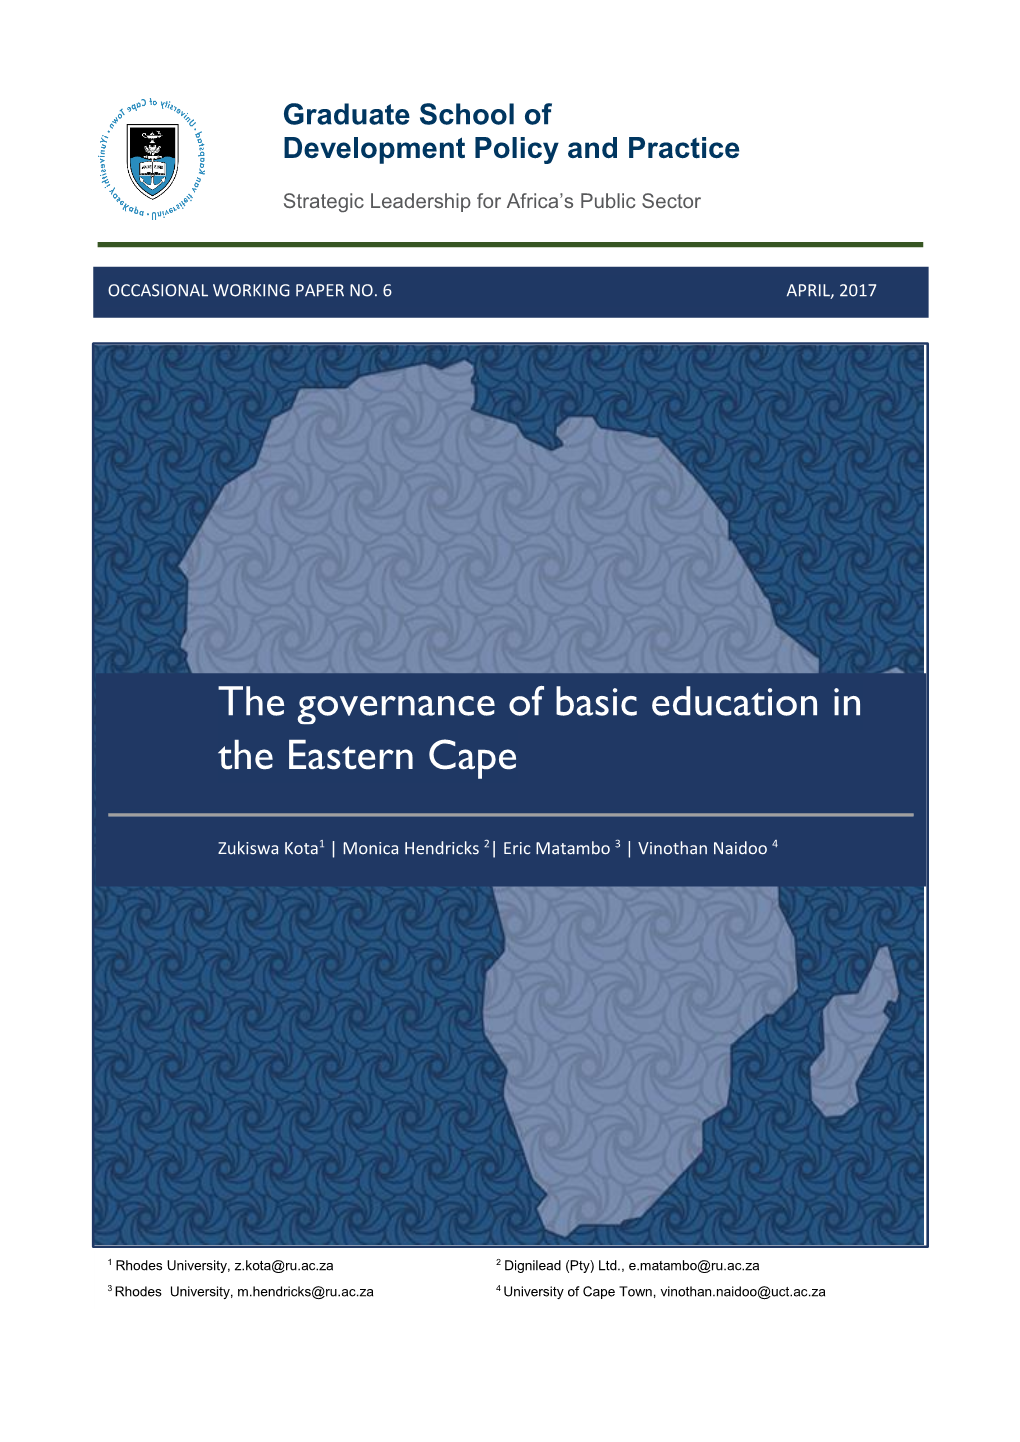 The Governance of Basic Education in the Eastern Cape